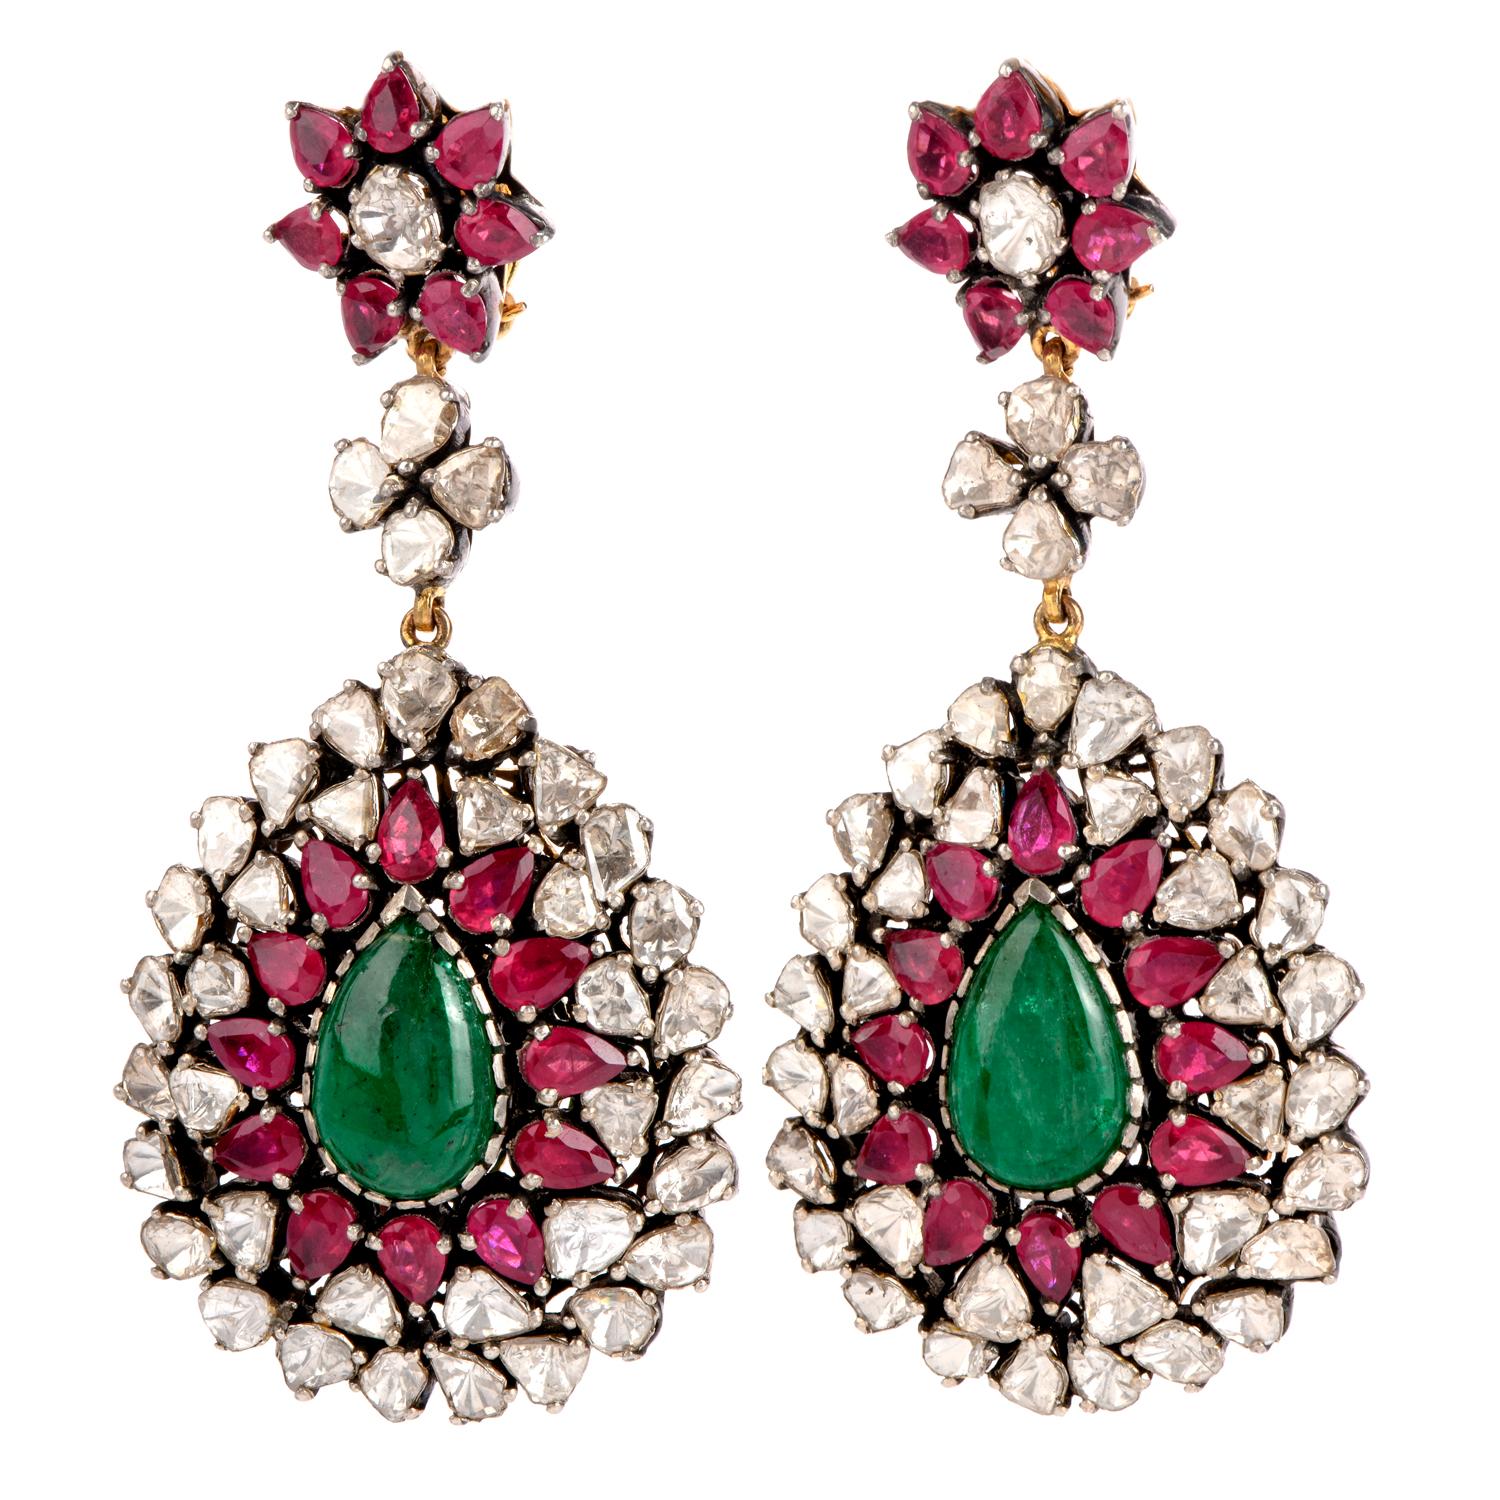 A touch of Green and red for any Holidays.

This stunning pair of 14k gold and silver earrings features a

Dangling design in the center as well as the entire piece. 

Prominent is the pear shaped genuine green Emerald 

swinging freely in the